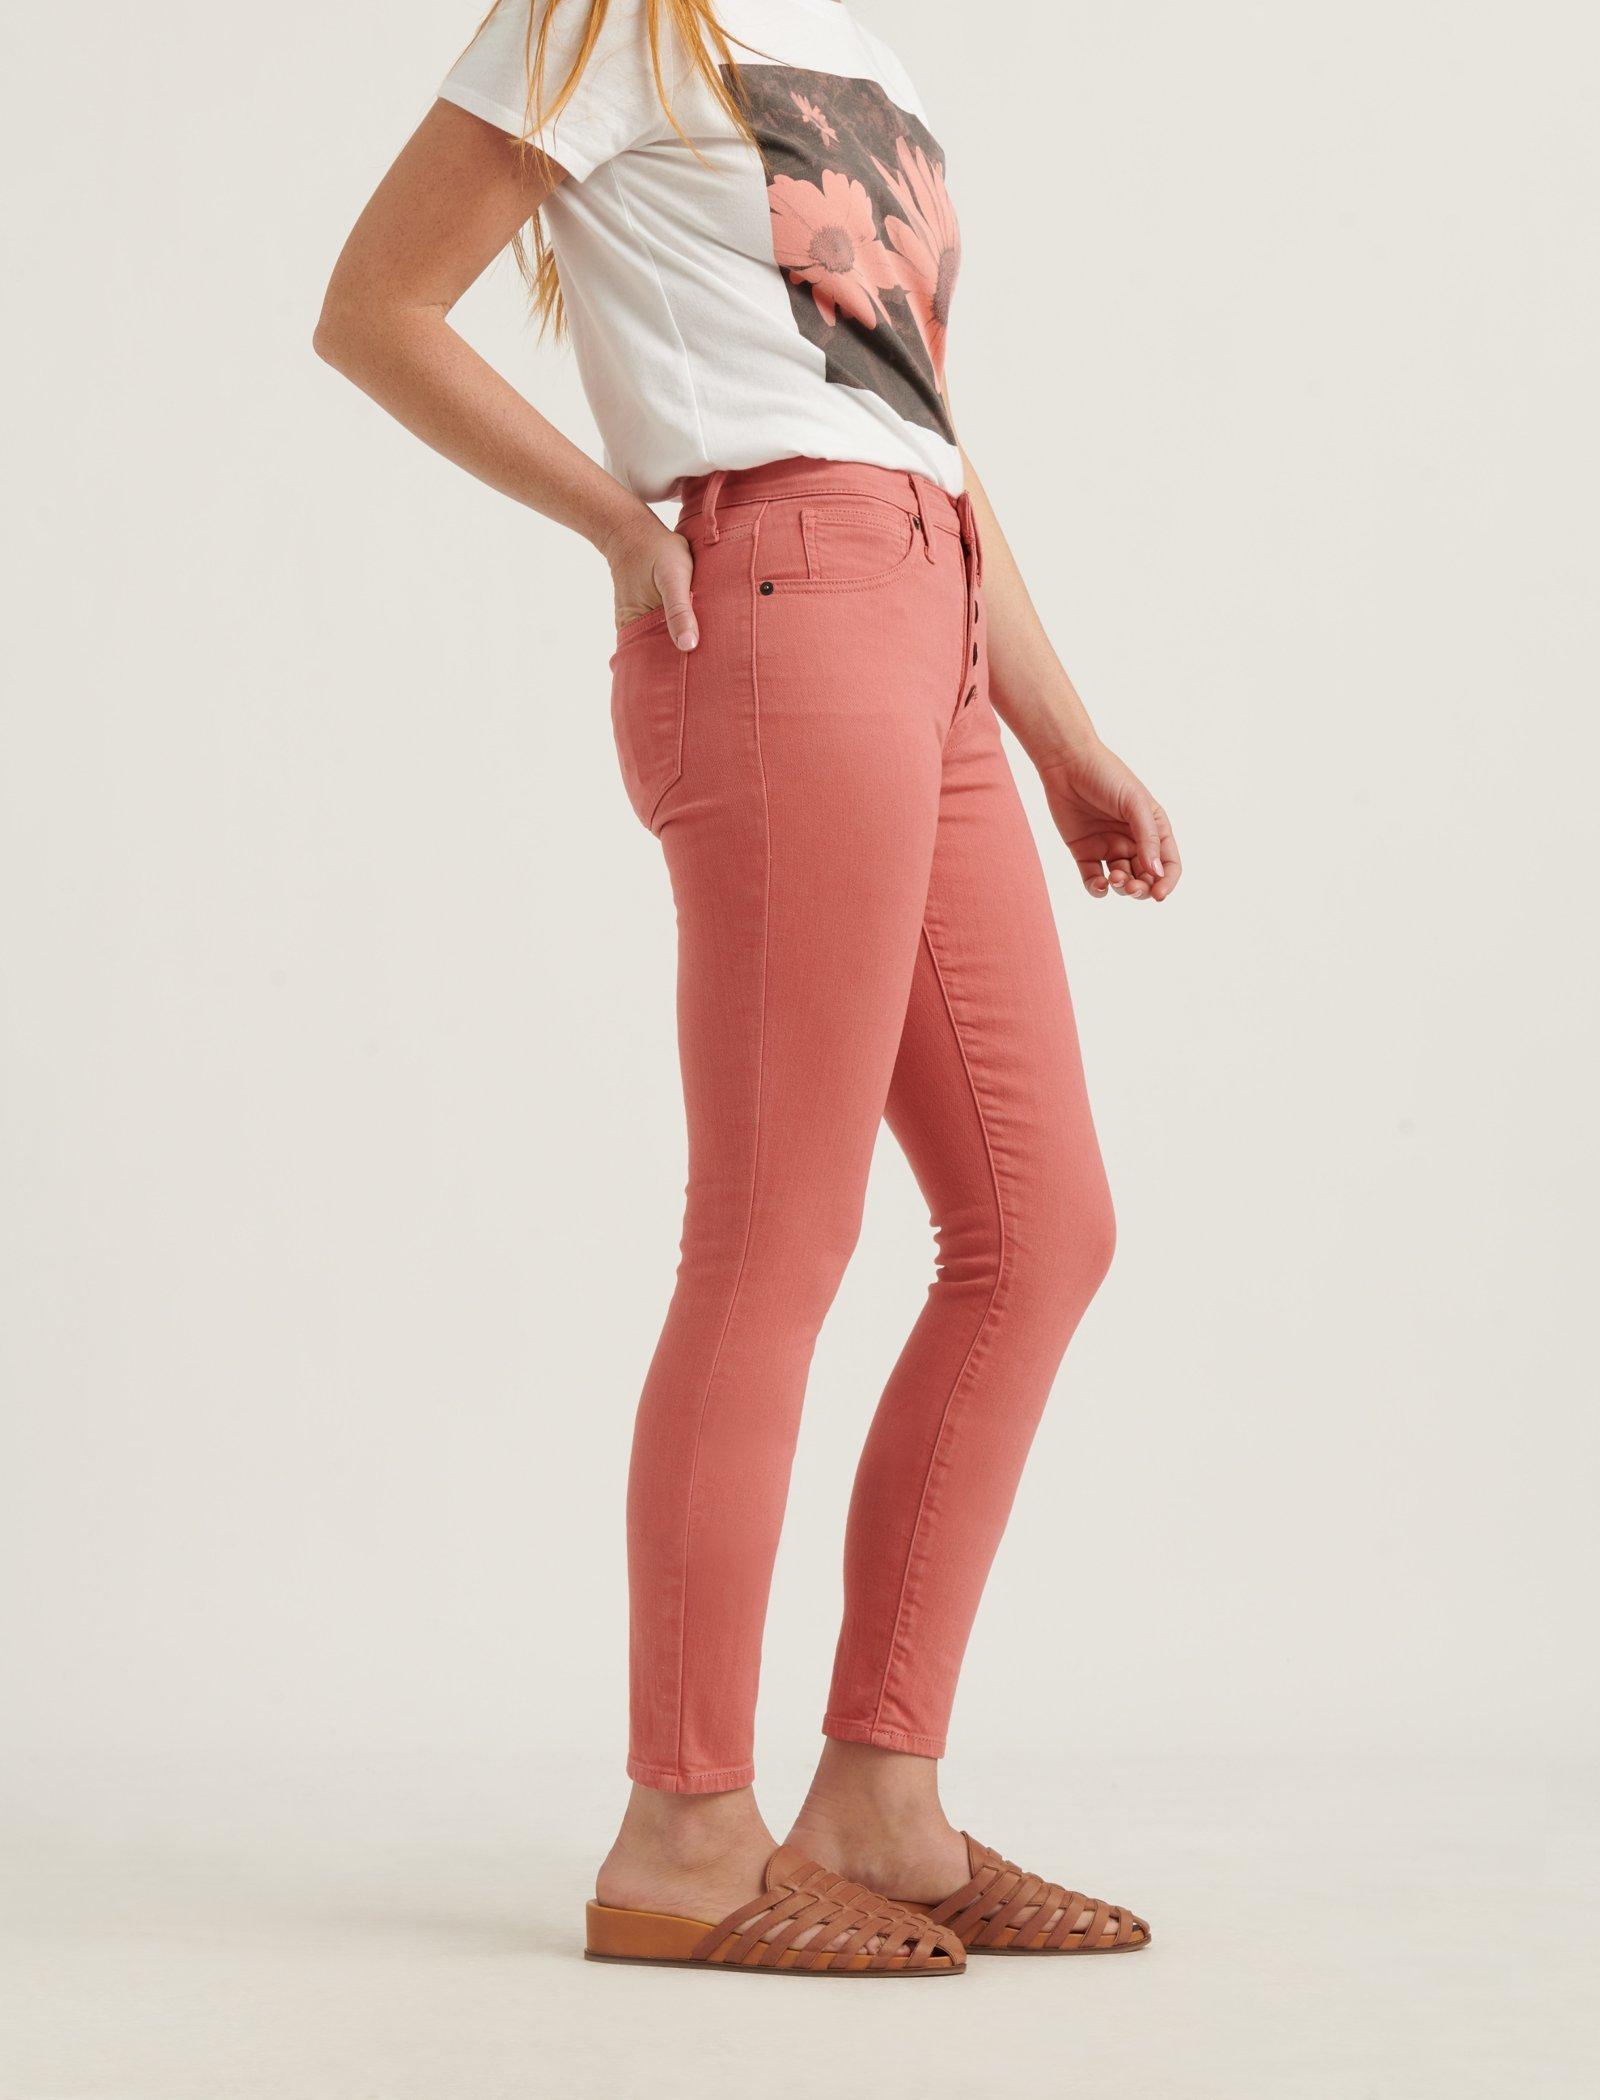 pink cropped jeans womens